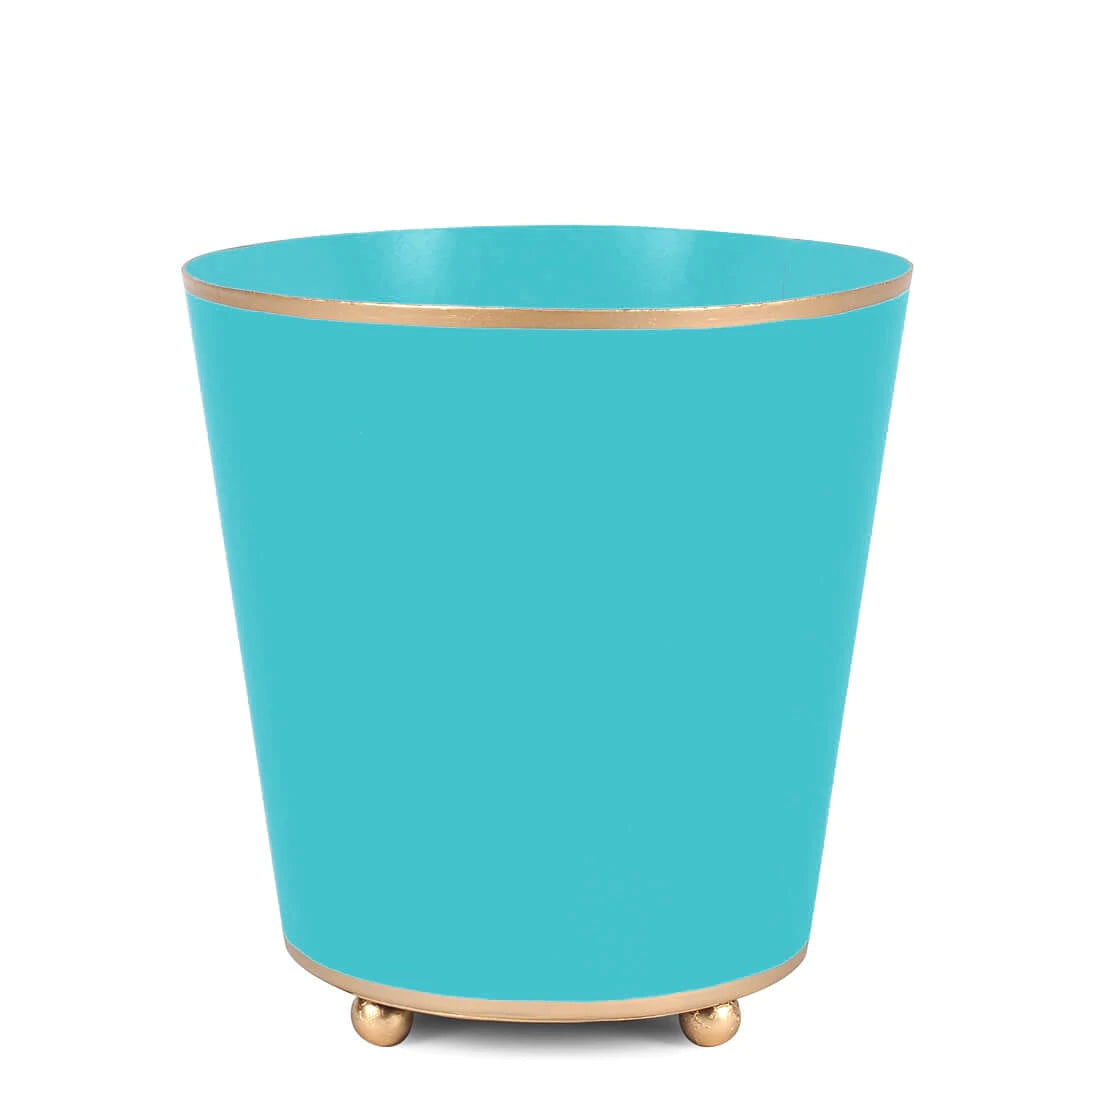 Turquoise Color Block Round Cachepot